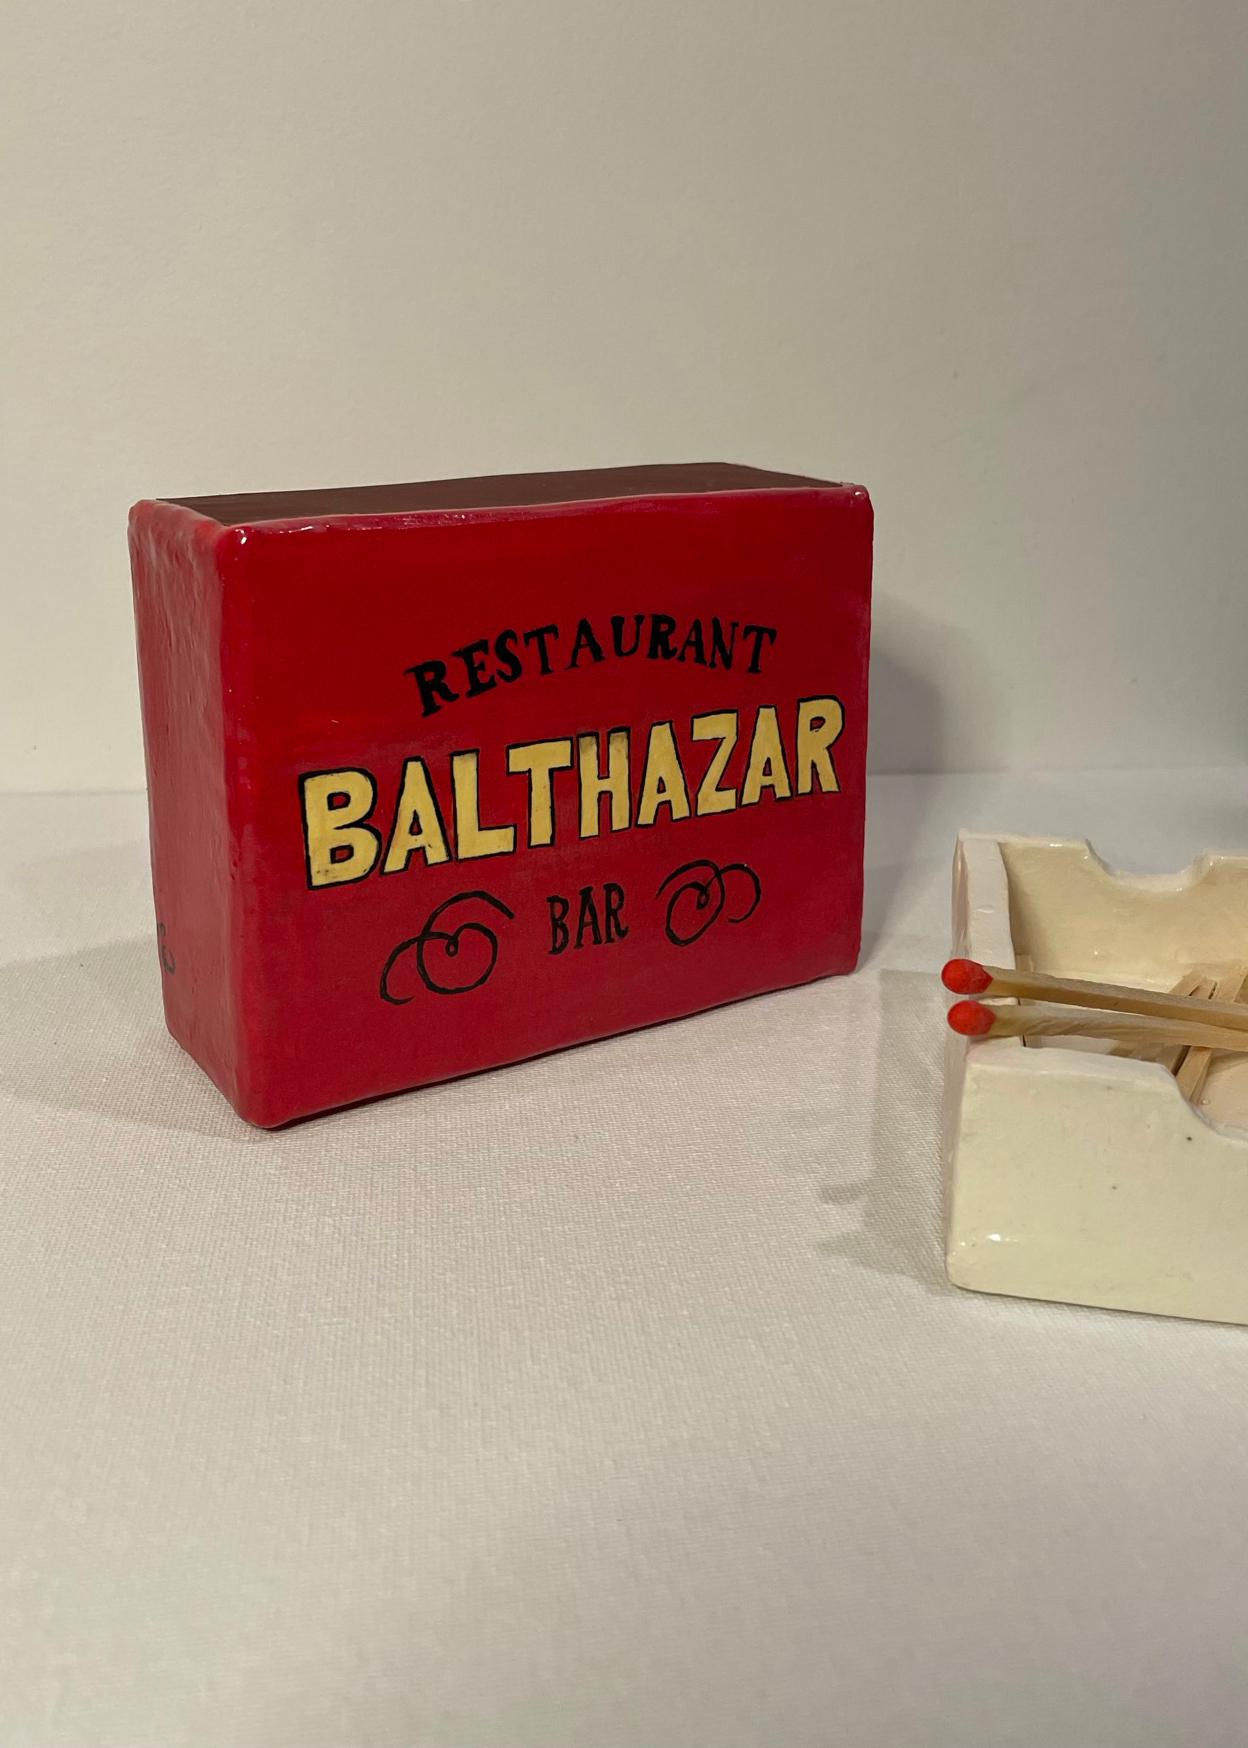 The Matchbox Series is composed of roughly 3”x 5” to 5” x 7” boxes that make direct references to iconic NYC institutions. These boxes come with slide out inserts that are filled with oversized matches, roughly 20-30 per order. There is also a fully